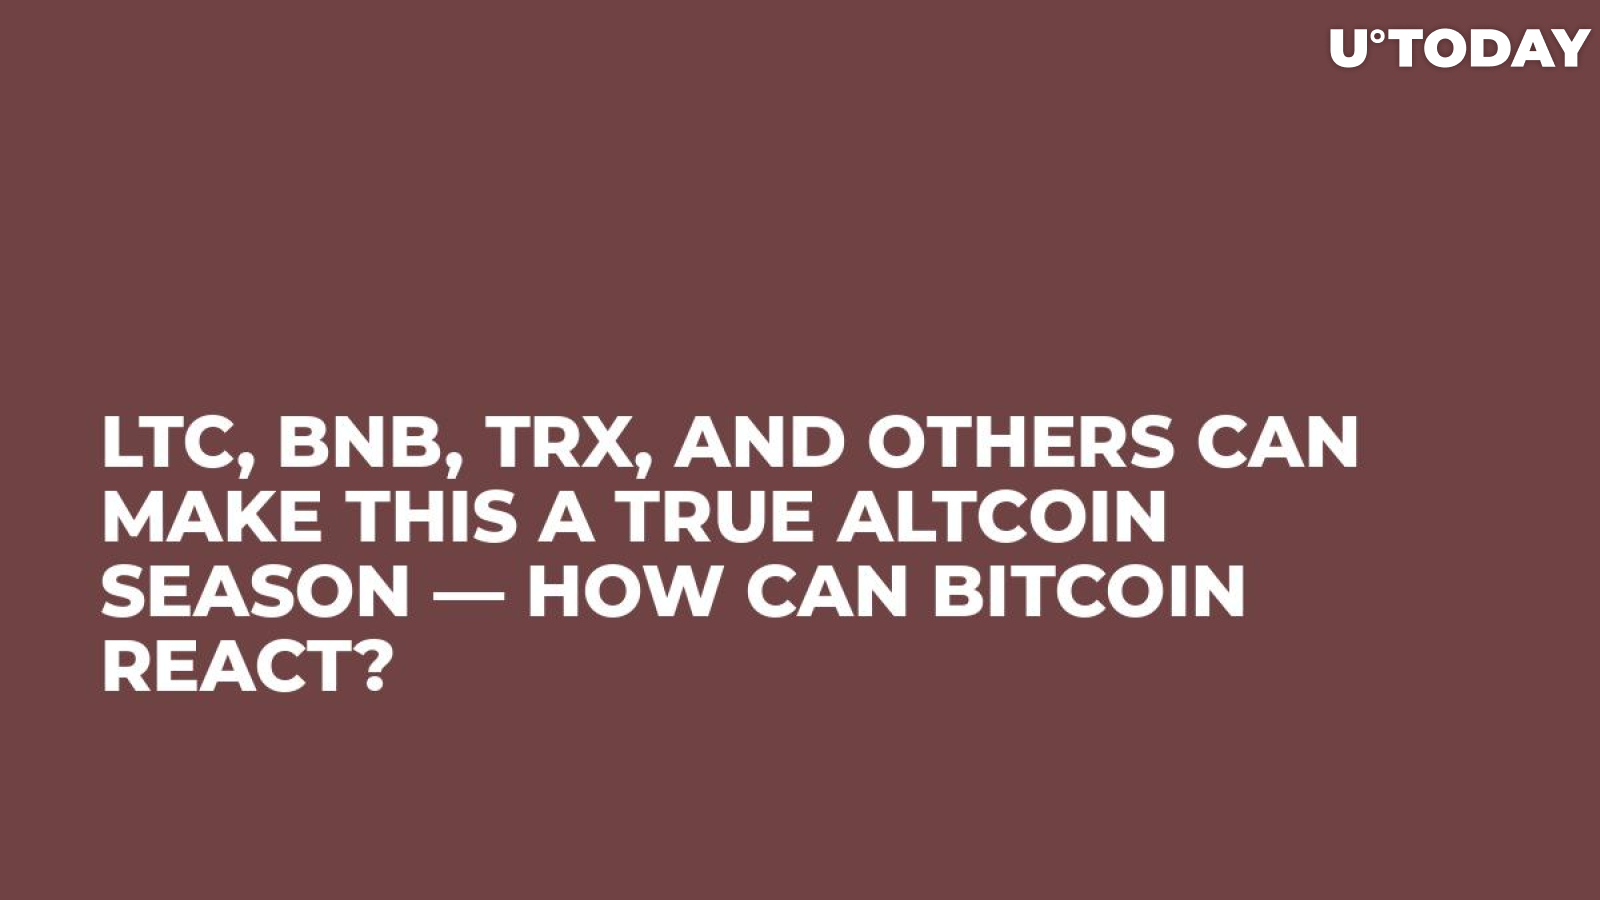 LTC, BNB, TRX, and Others Can Make This a True Altcoin Season — How Can Bitcoin React?